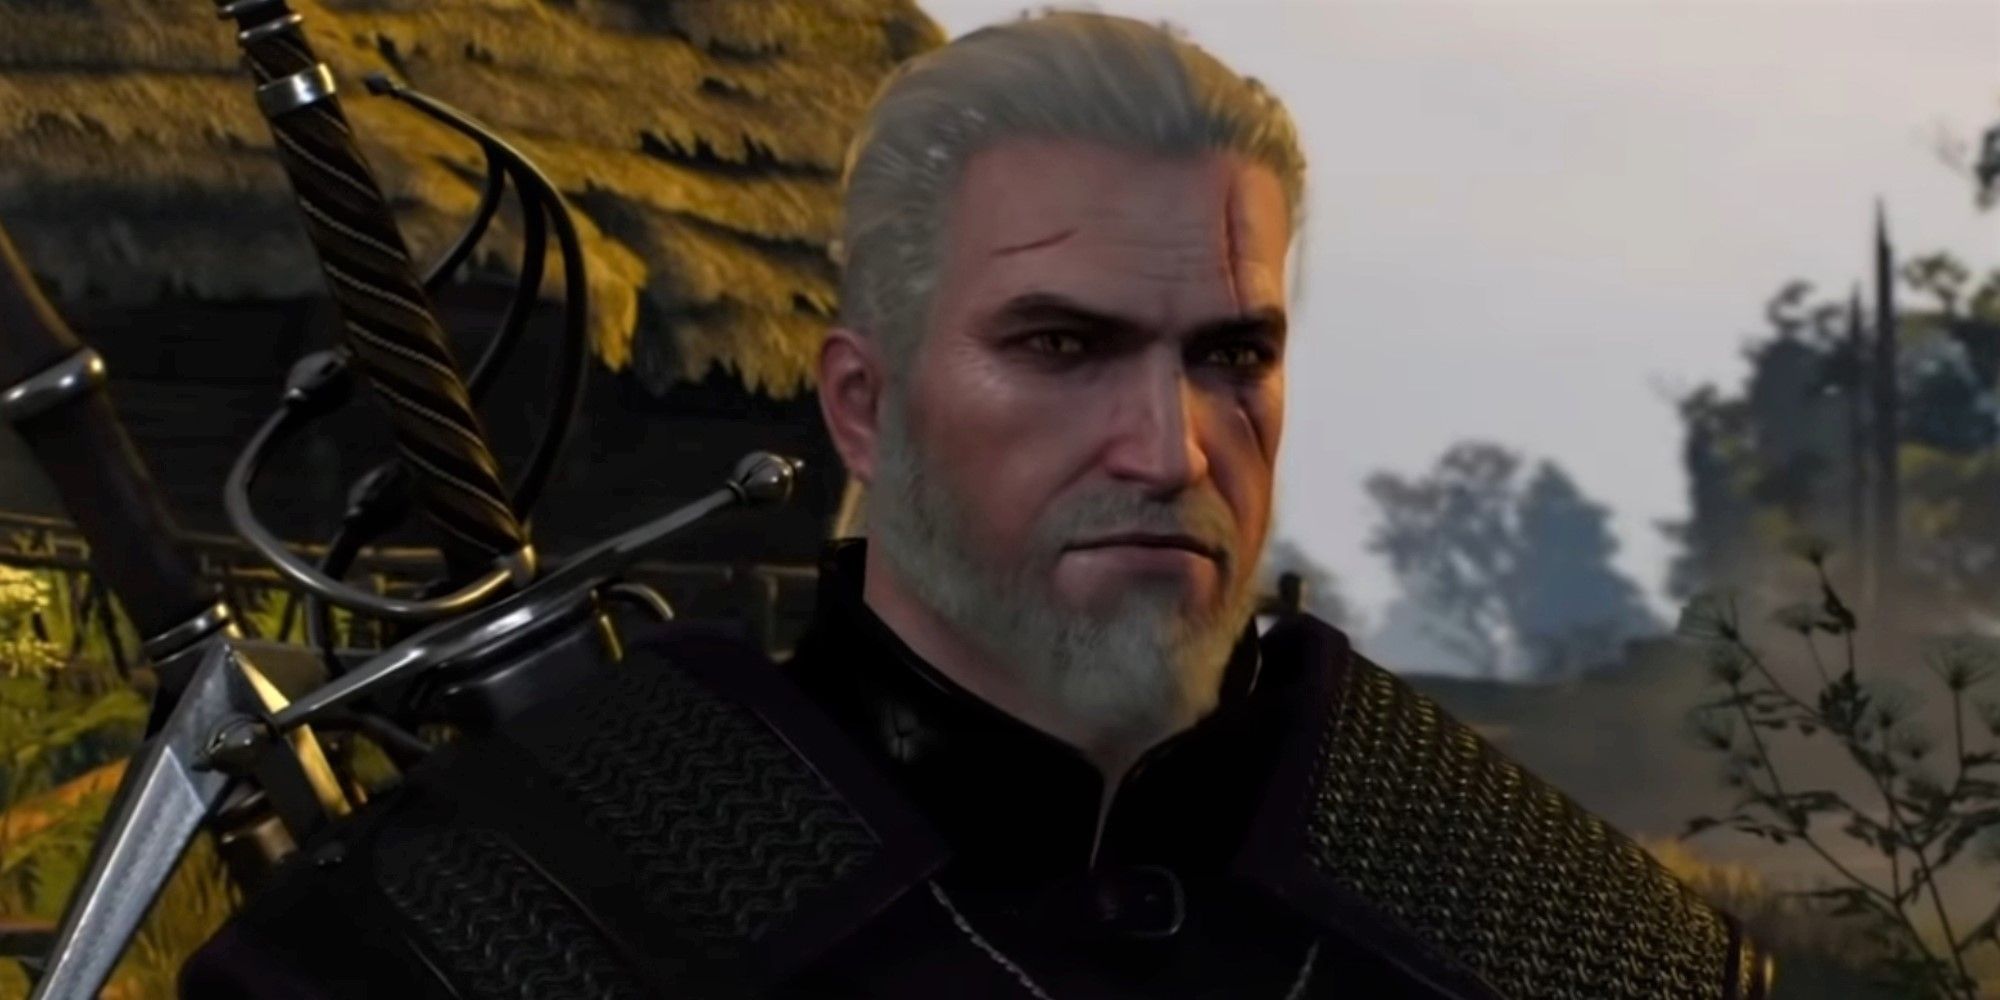 Geralt Of Rivia from The Witcher 3.